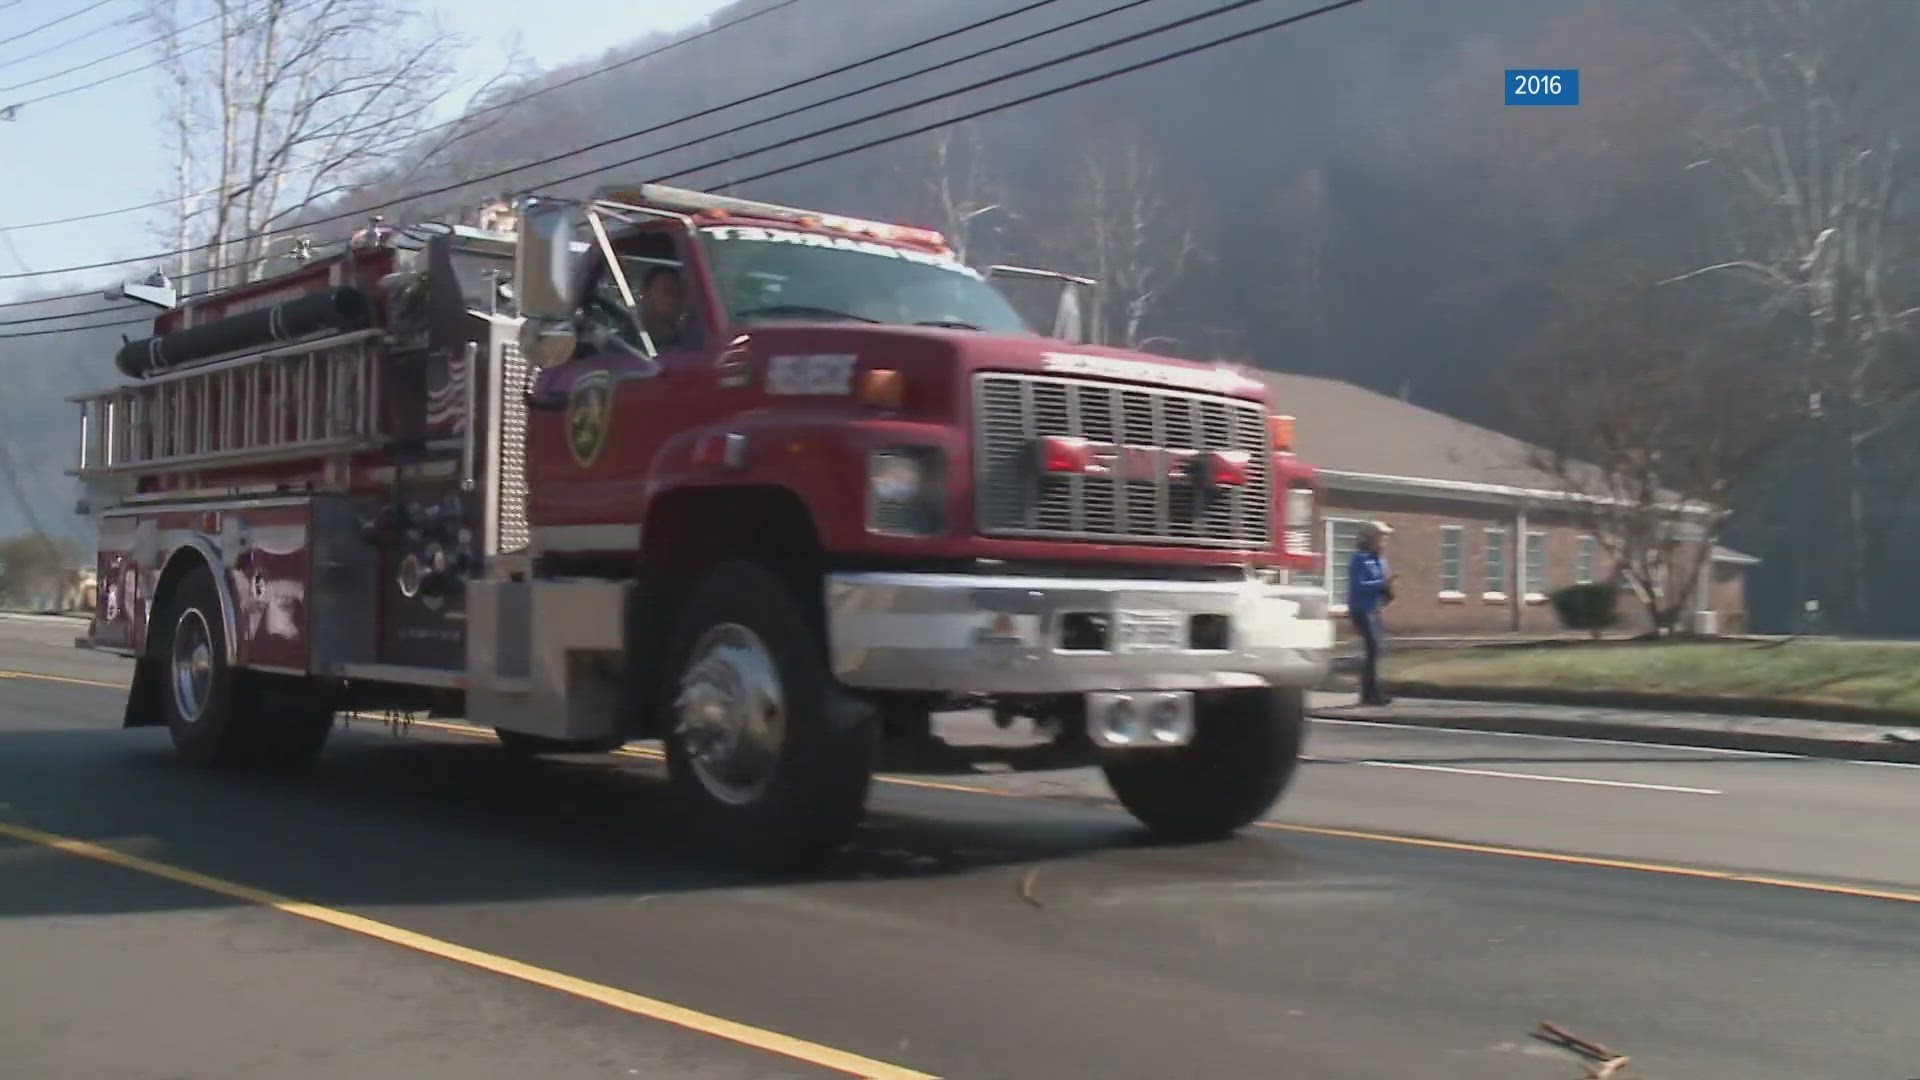 Crews from agencies across Sevier County responded to the wildfire.